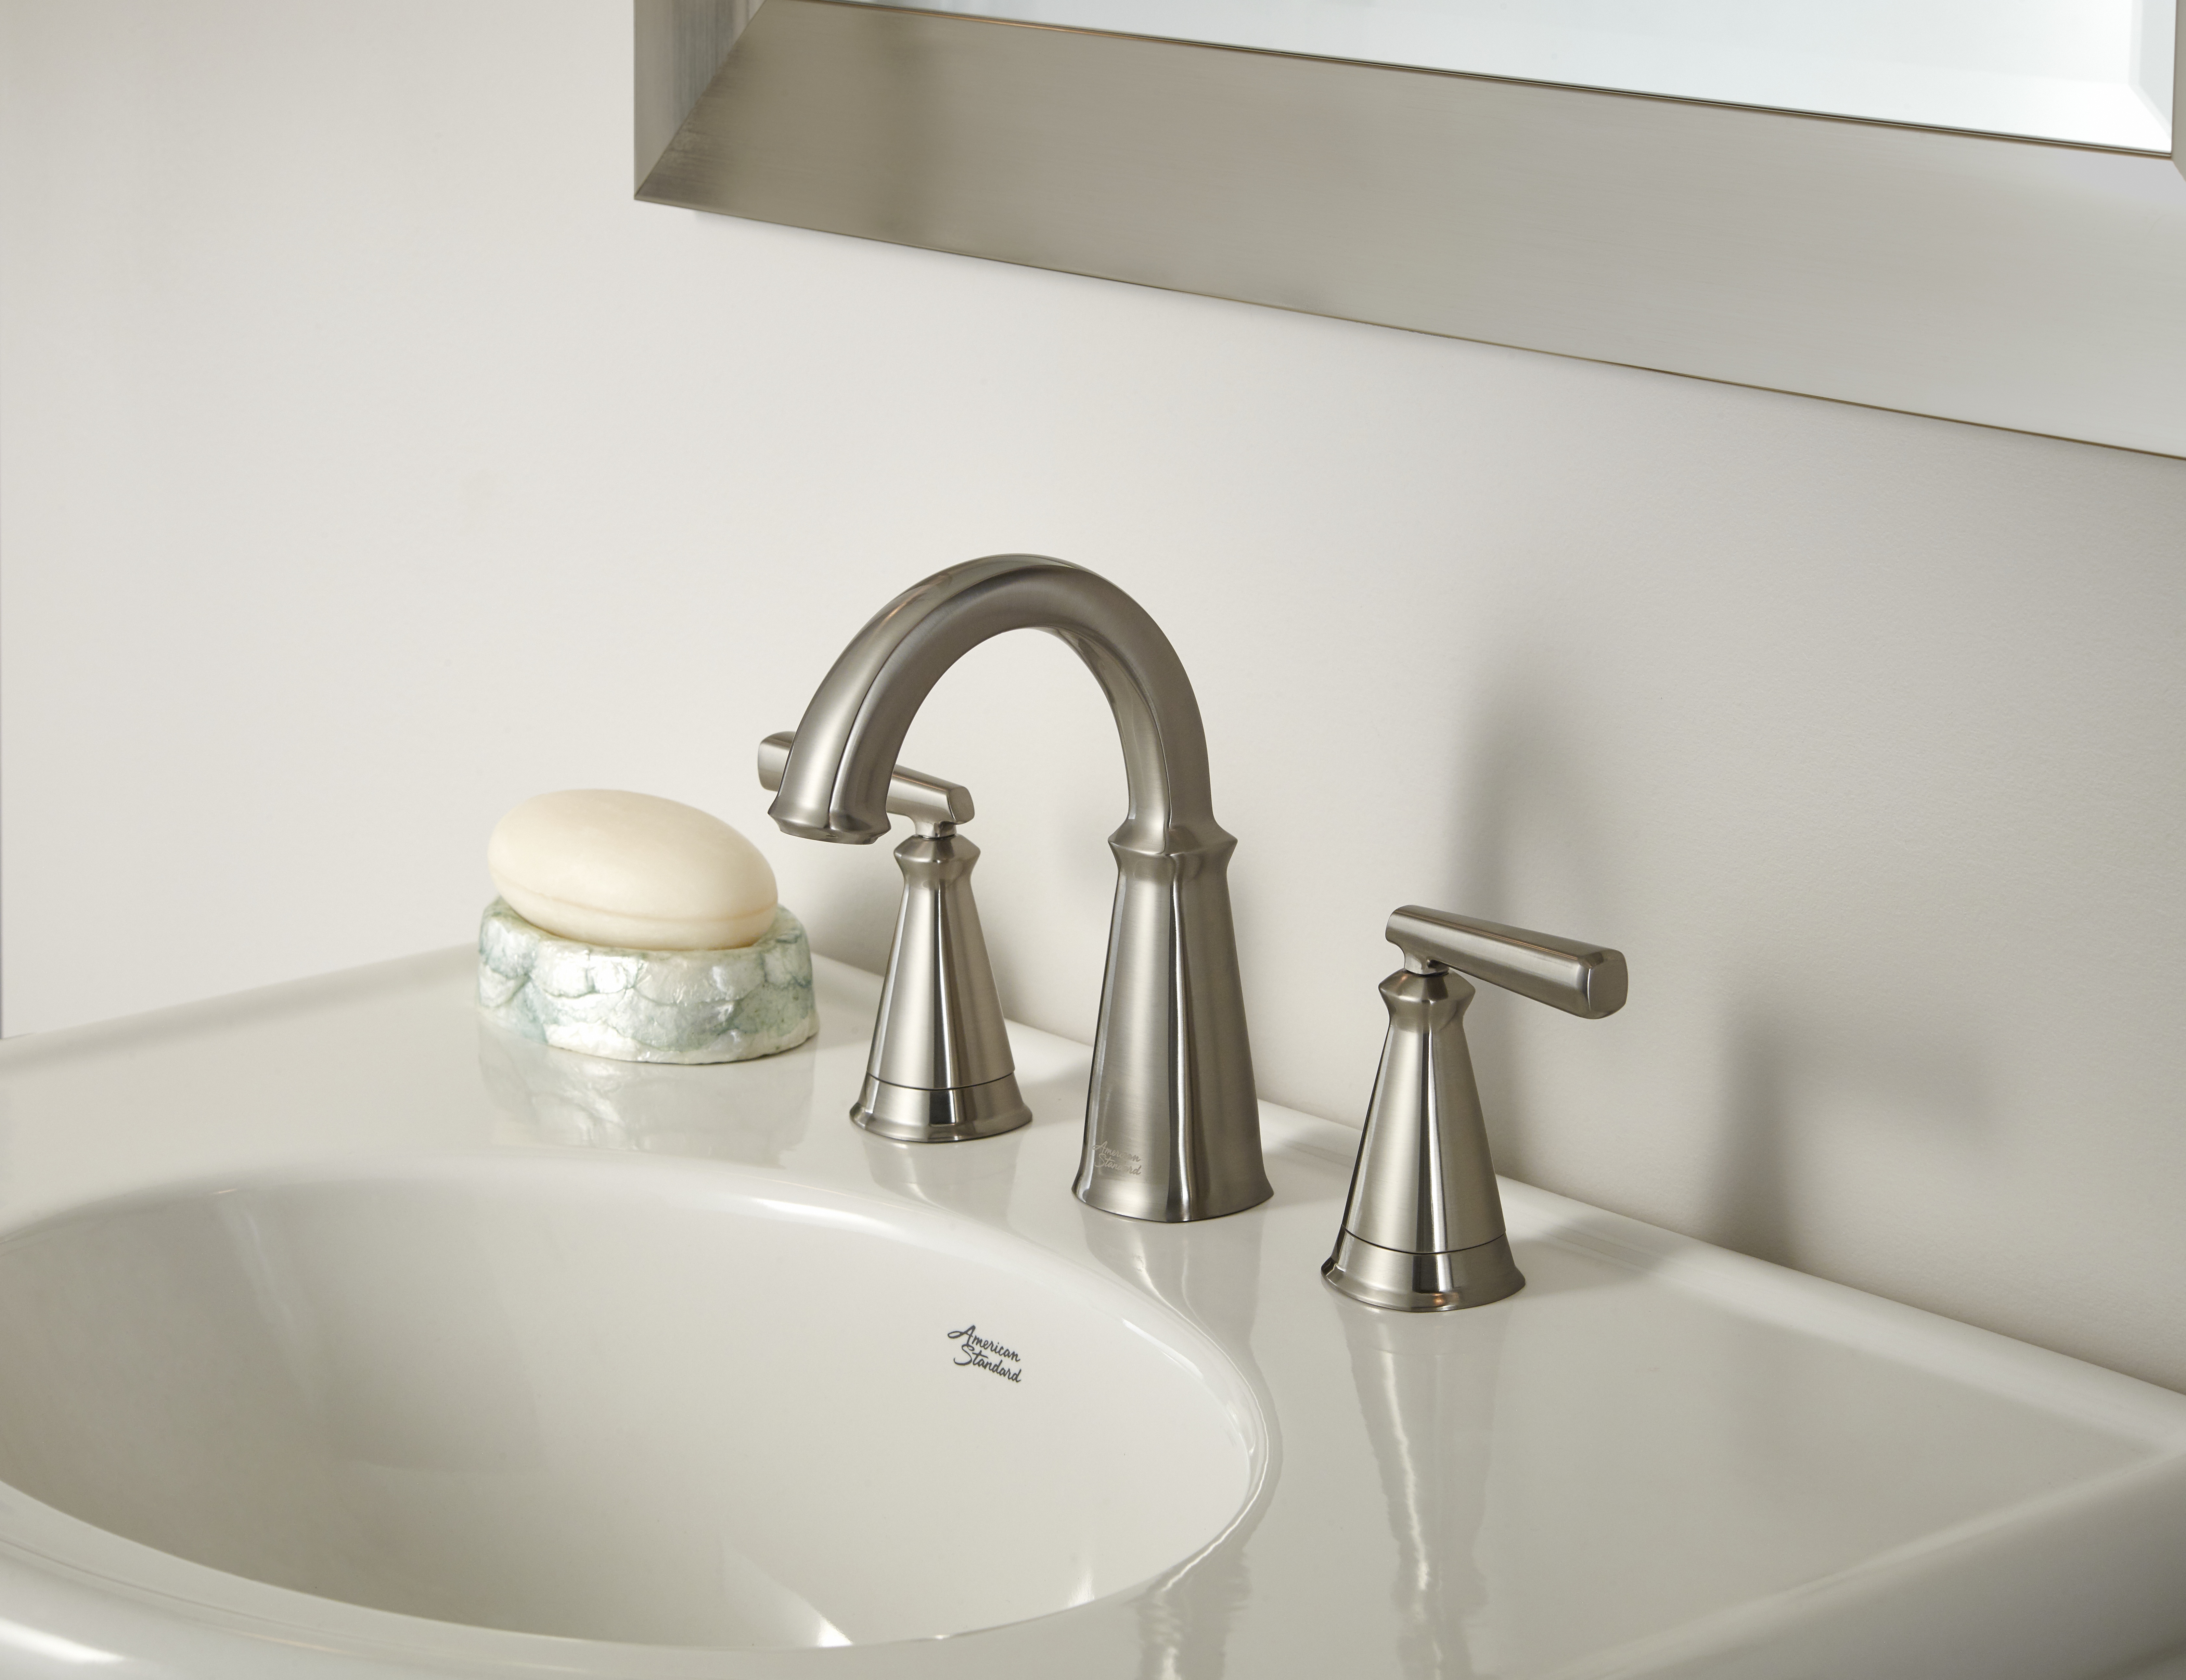 Kirkdale 8-In. Widespread 2-Handle Bathroom Faucet 1.2 GPM with Lever Handles